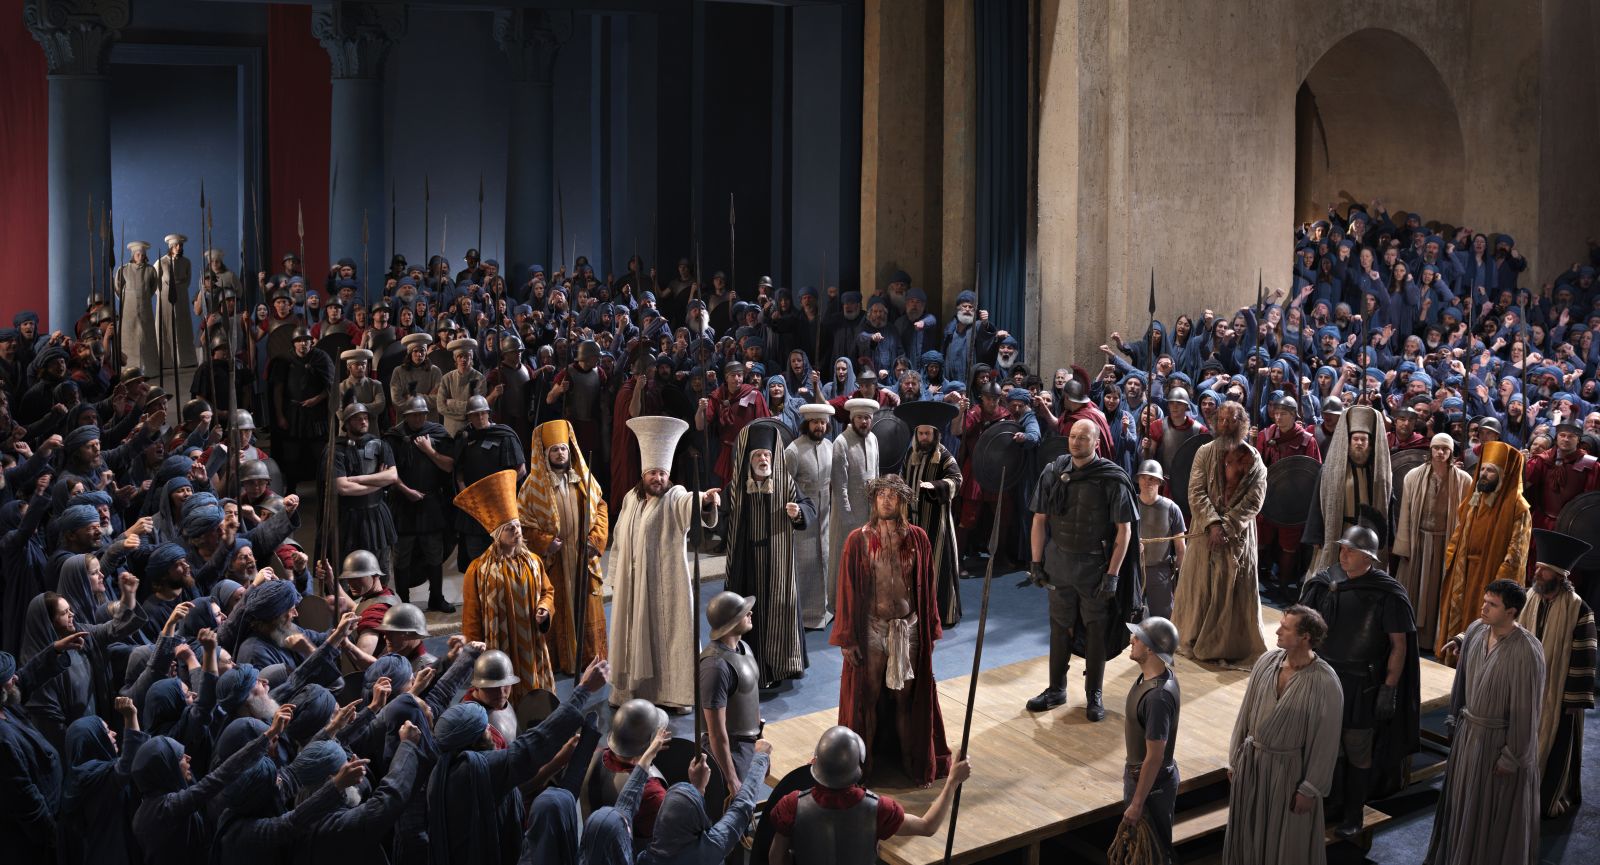 The trial of Christ (Oberammergau Passion Play)